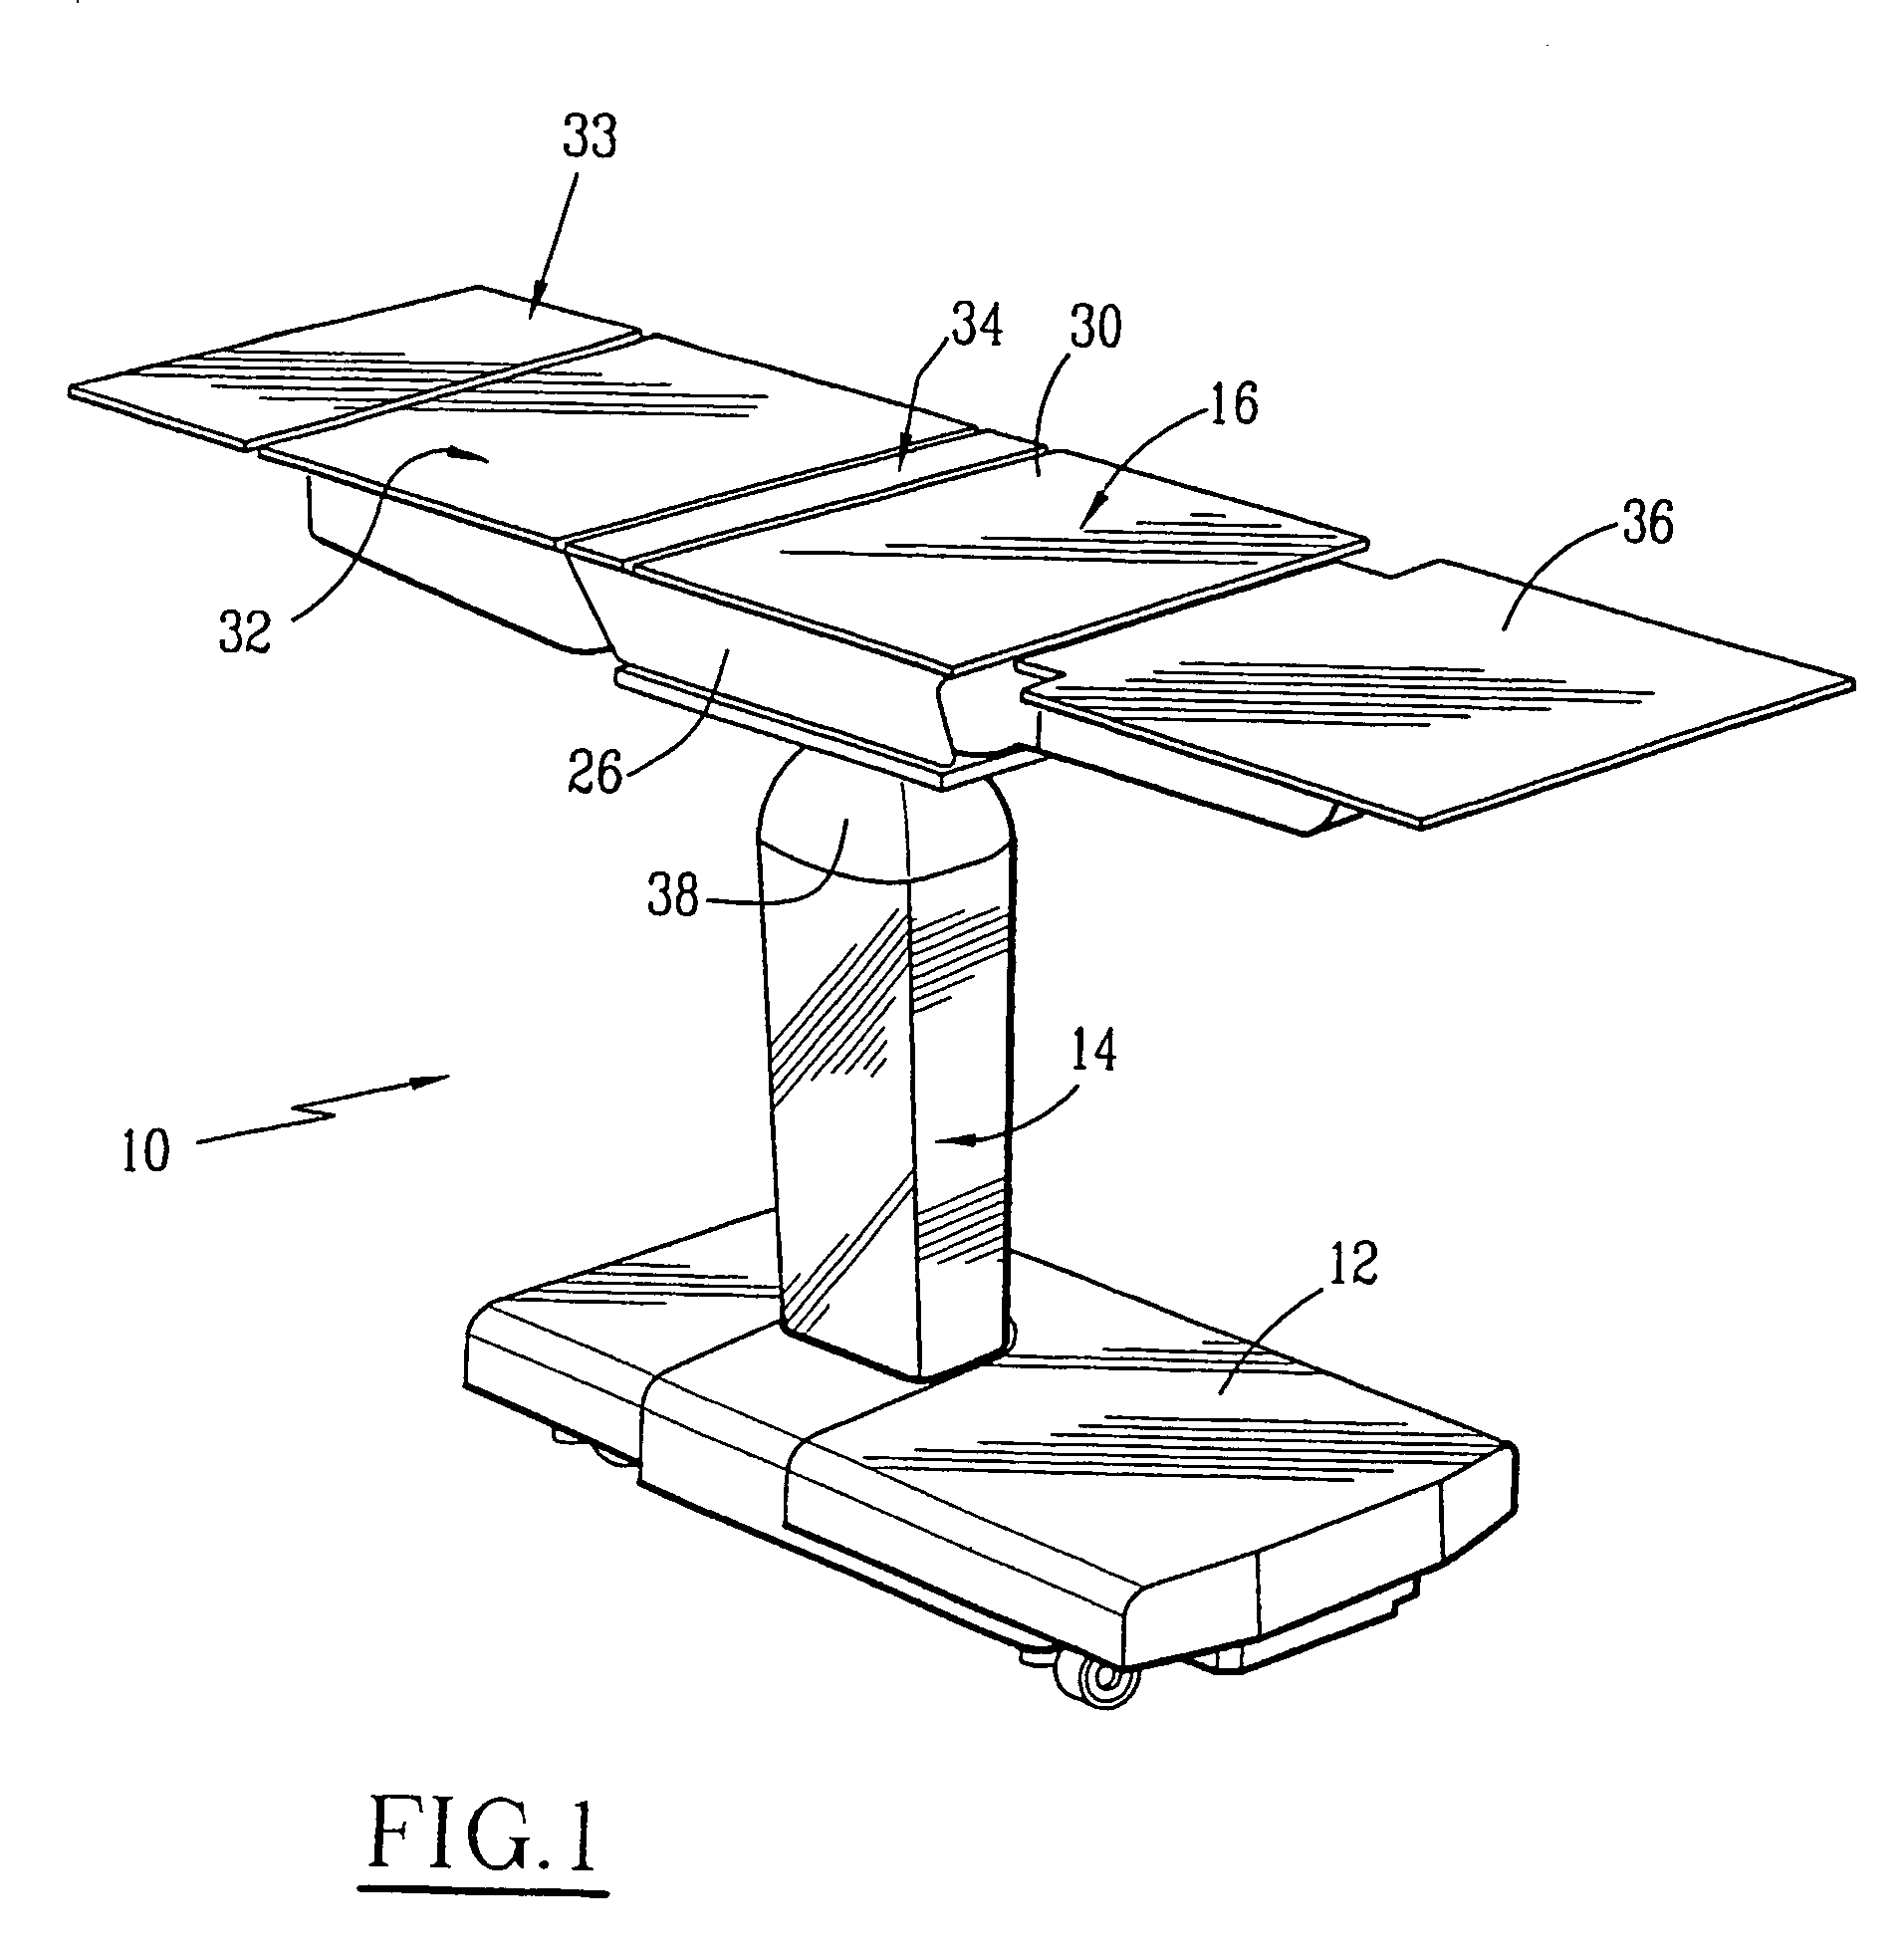 Motorized operating table with multiple sections